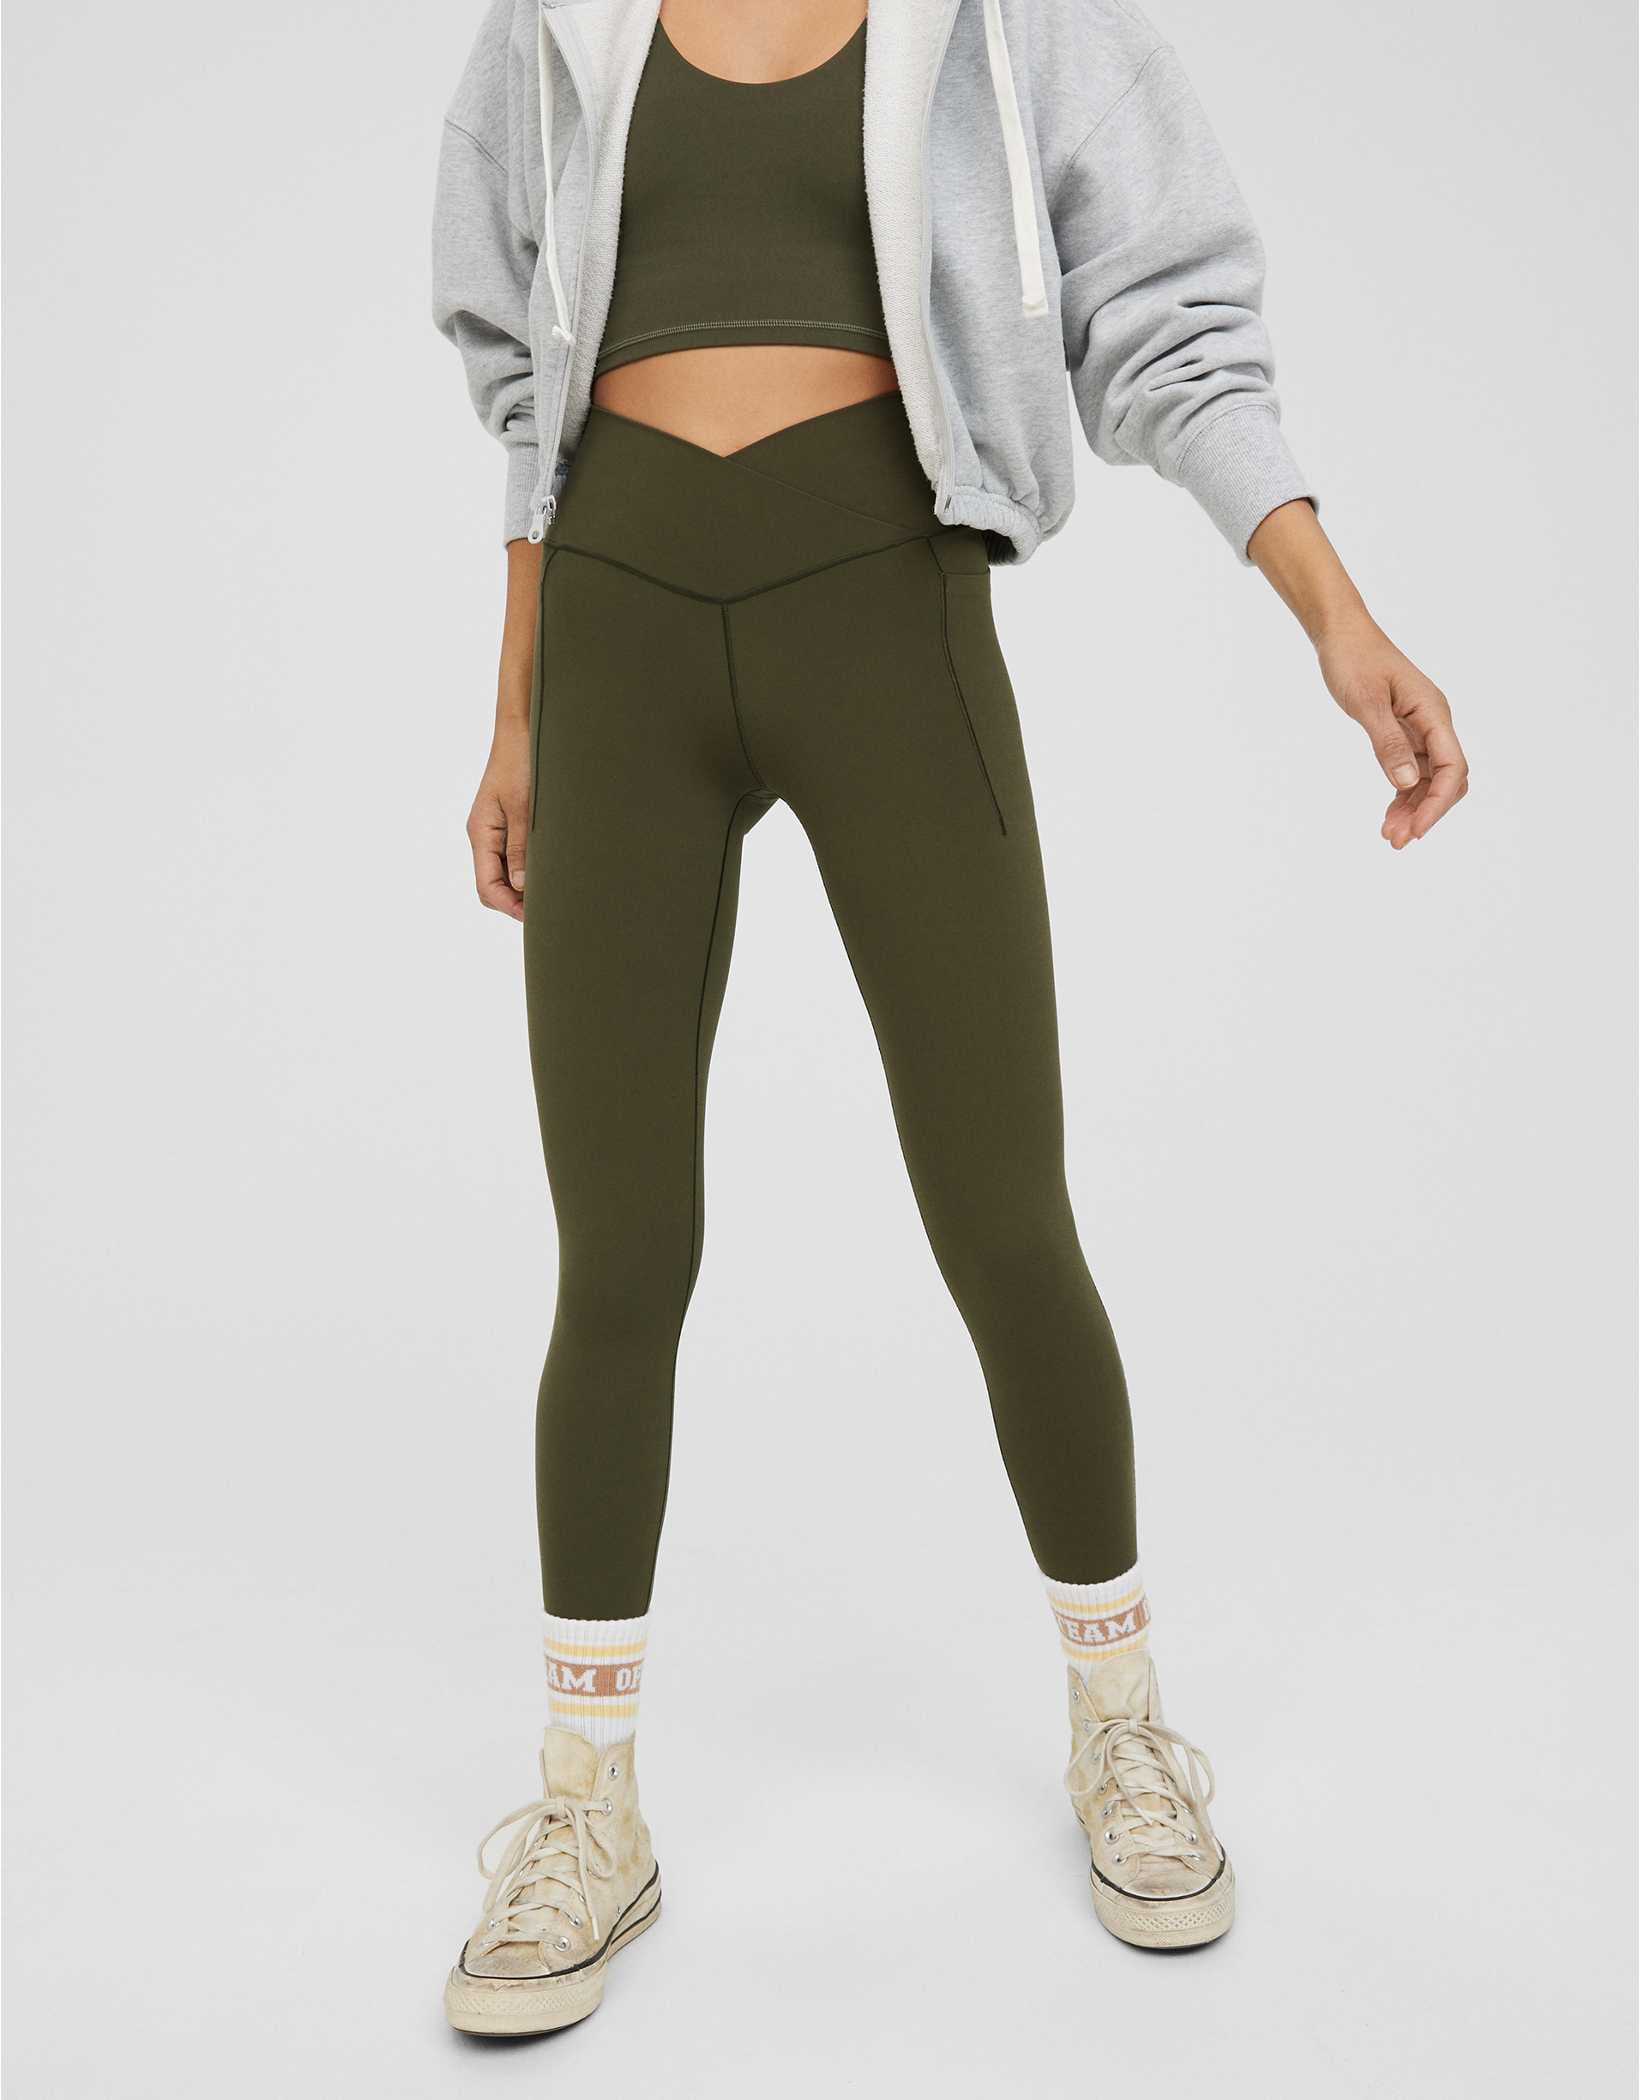 OFFLINE By Aerie Real Me High Waisted Legging  Legging, High waisted  leggings, High waisted cropped pants